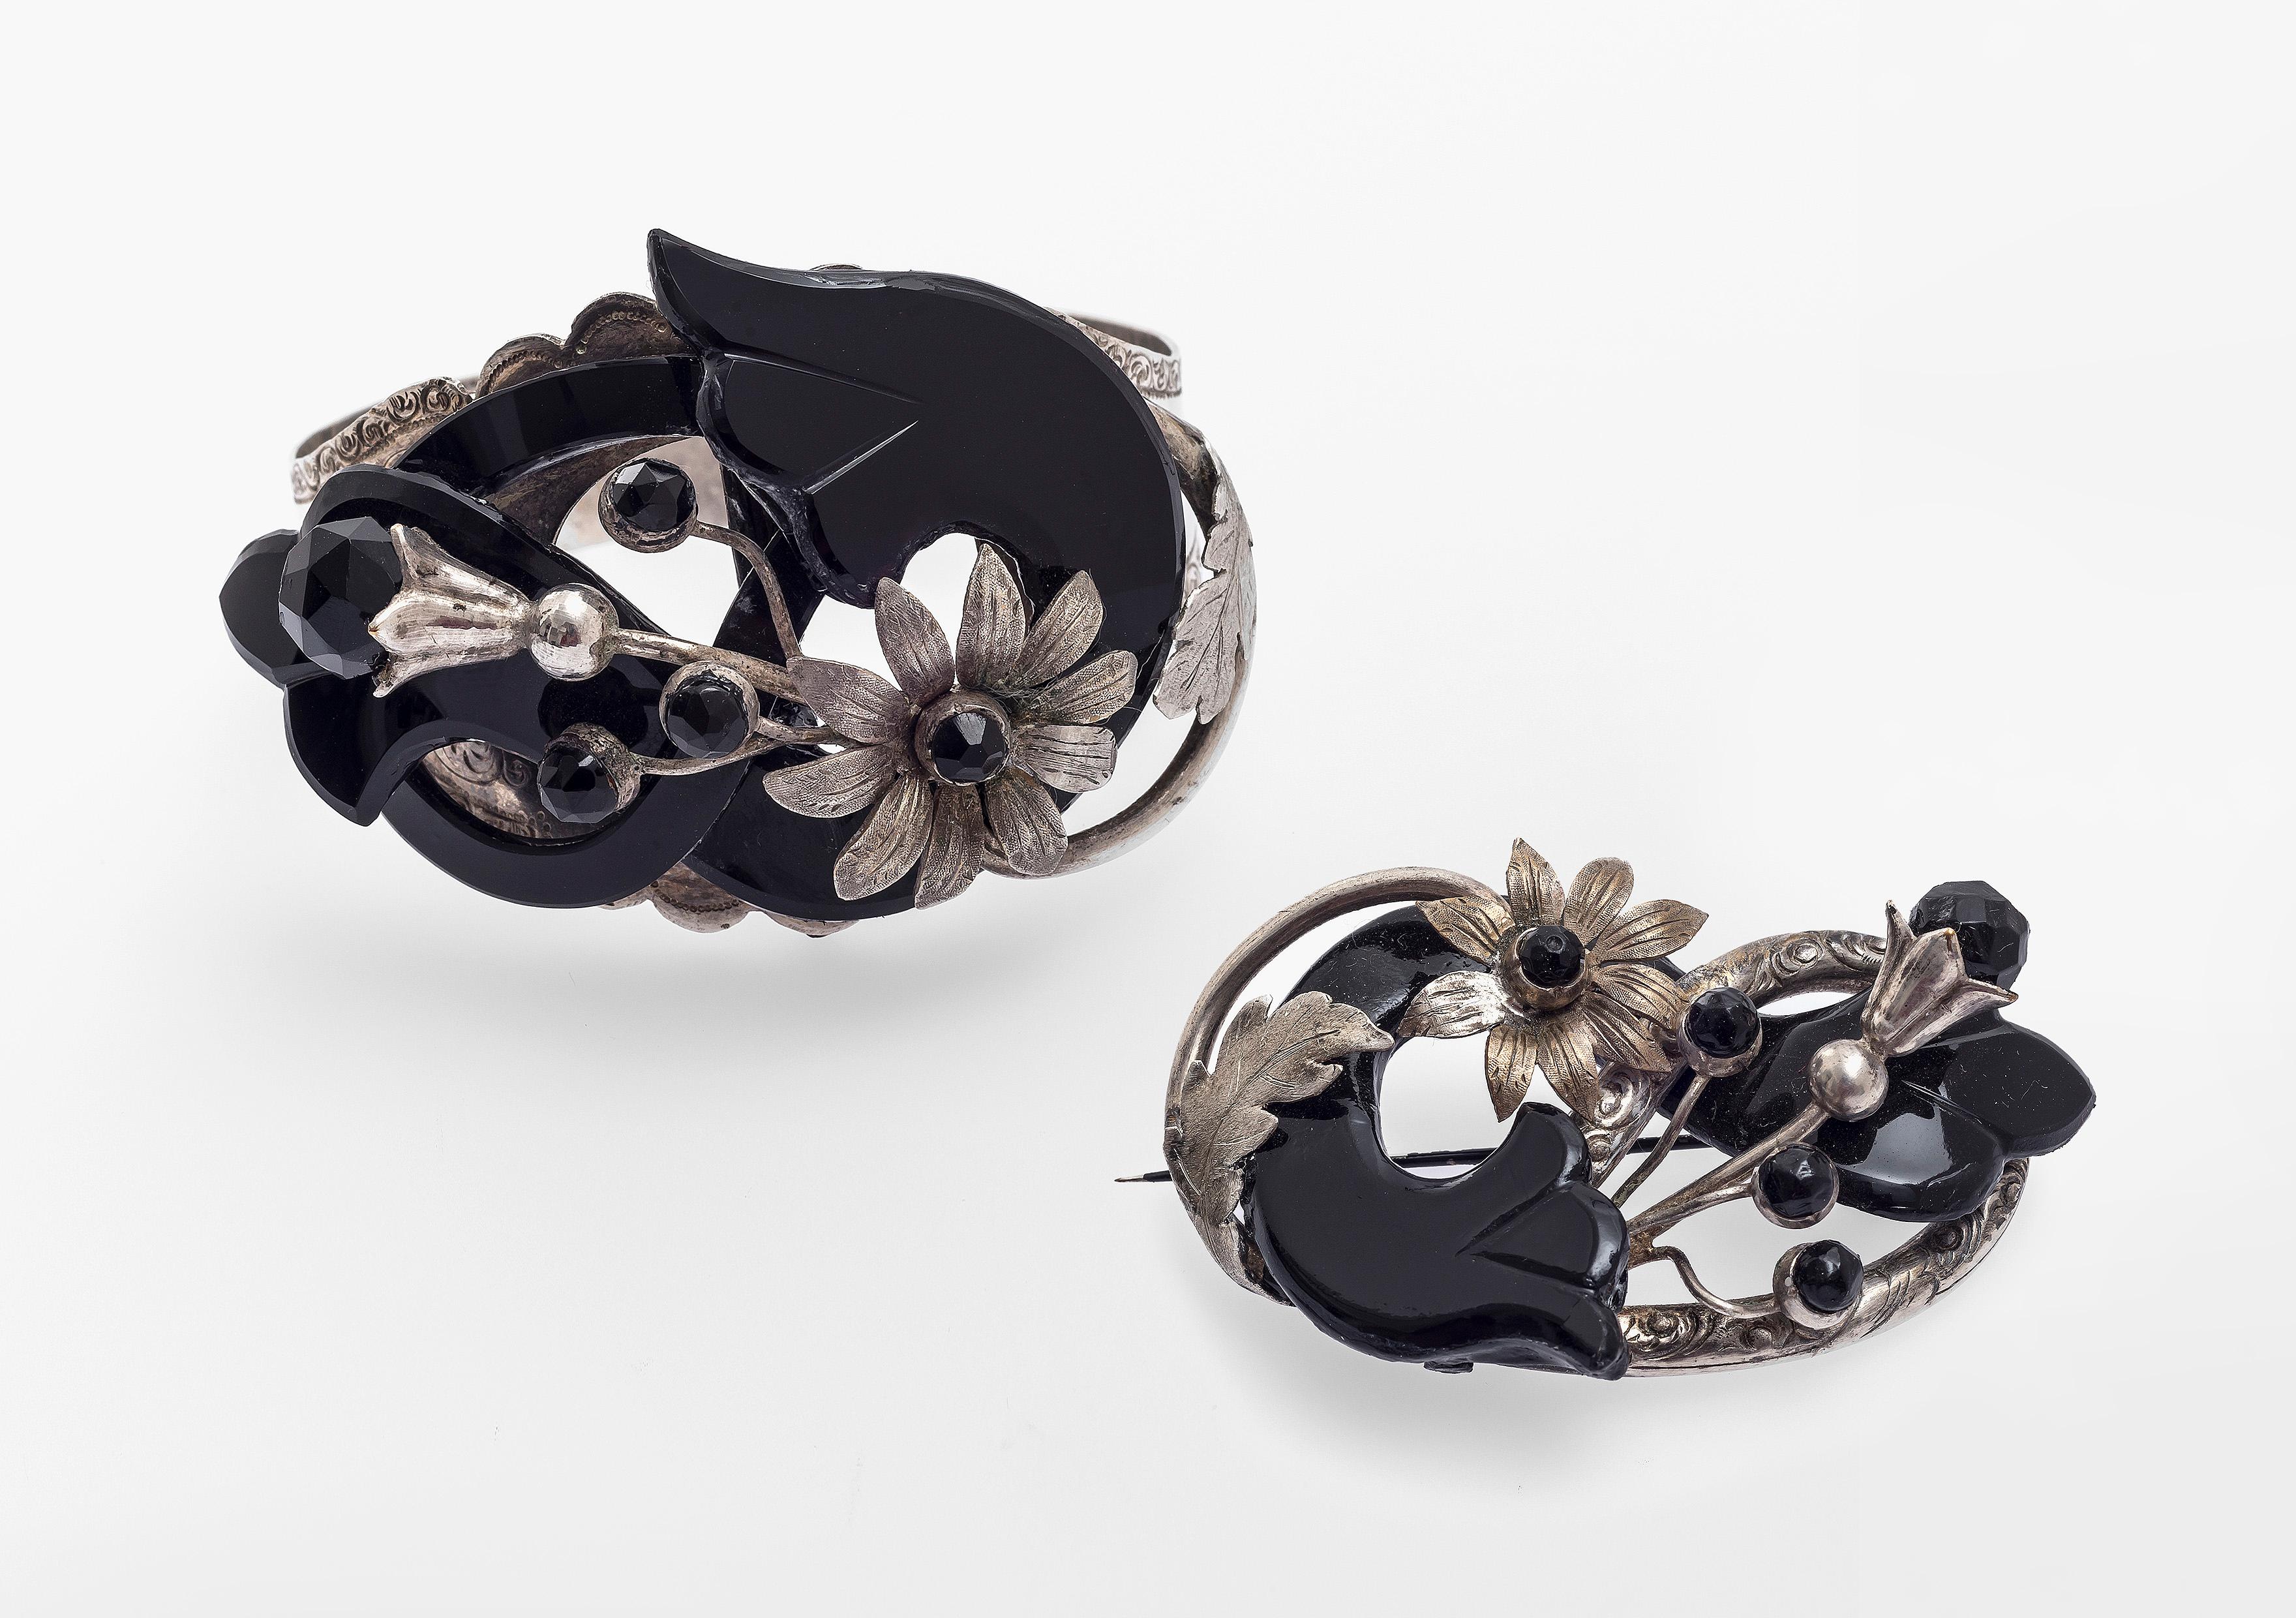 This excellent bracelet with matching brooch was made out of silver and onyx and is a fine example of thr extavagance of fine Viktorianjewelery around 1850. The dem-parure was made out of silver and onyx and  is accompanied by its original case.